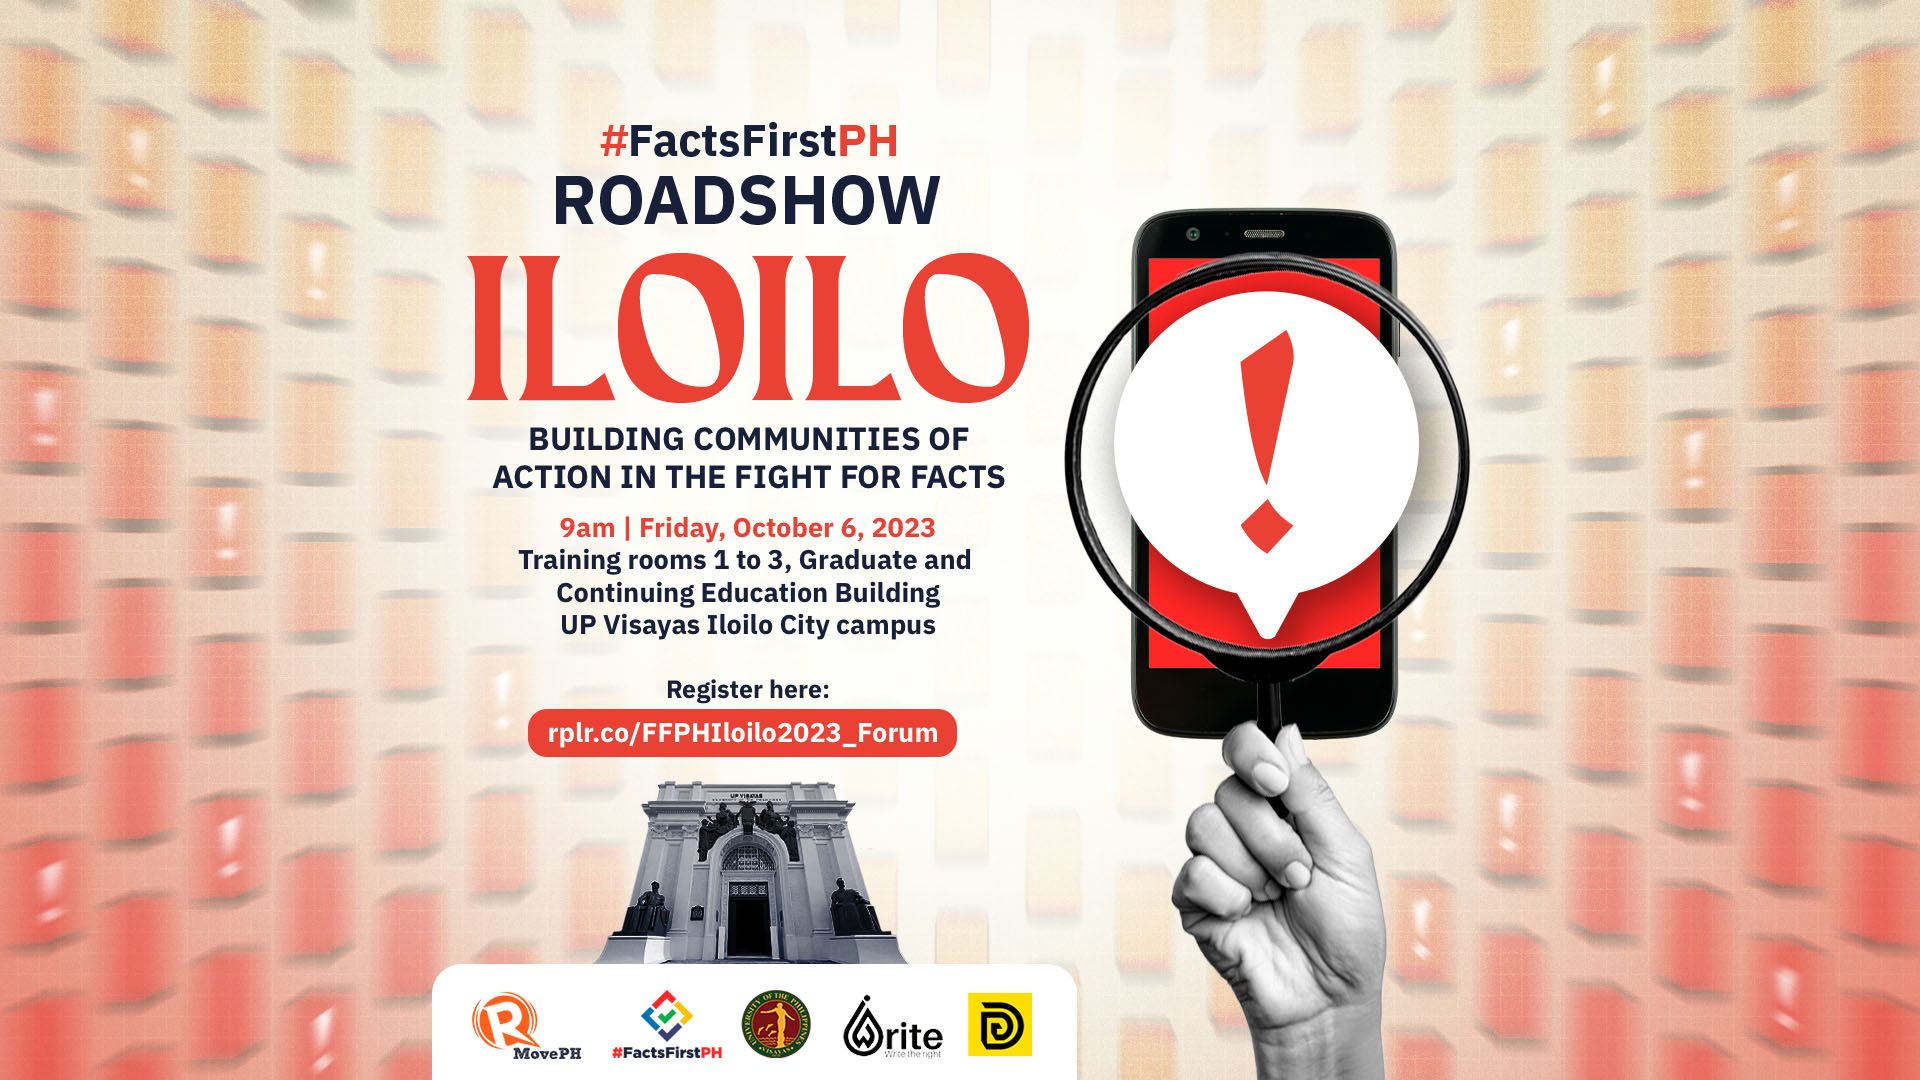 #FactsFirstPH heads to UP Visayas for its Iloilo launch